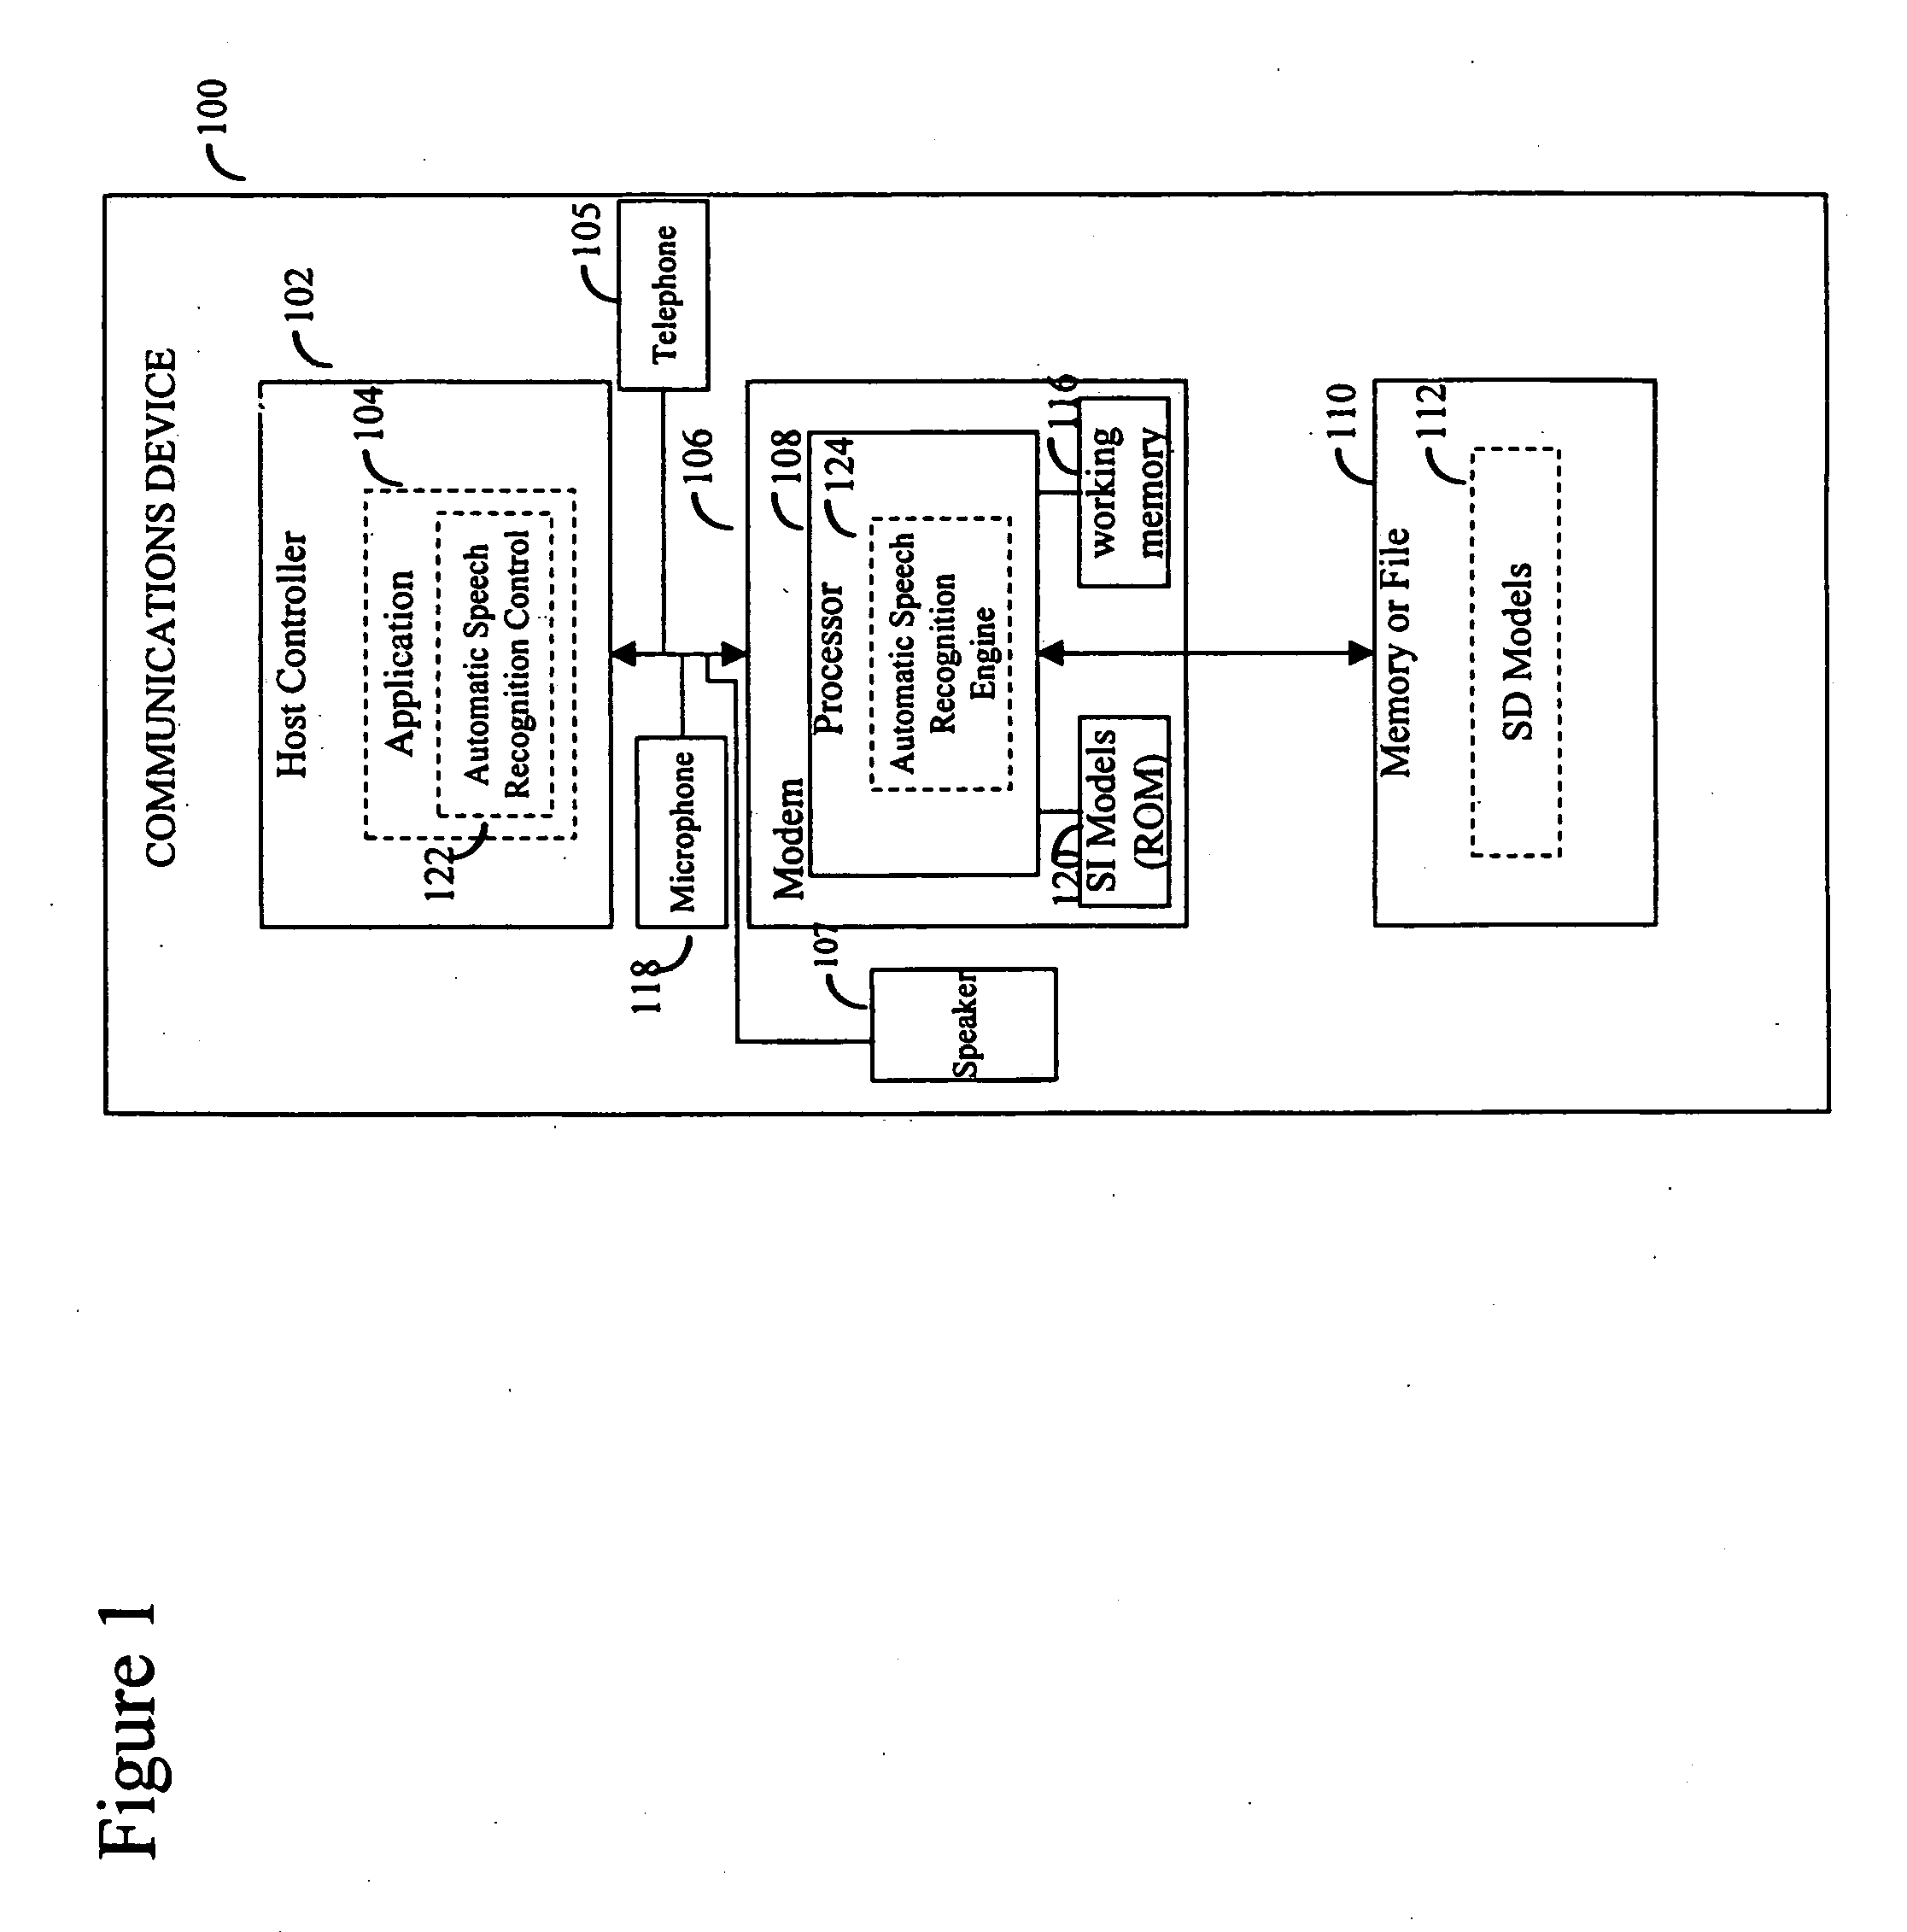 Automatic speech recognition to control integrated communication devices